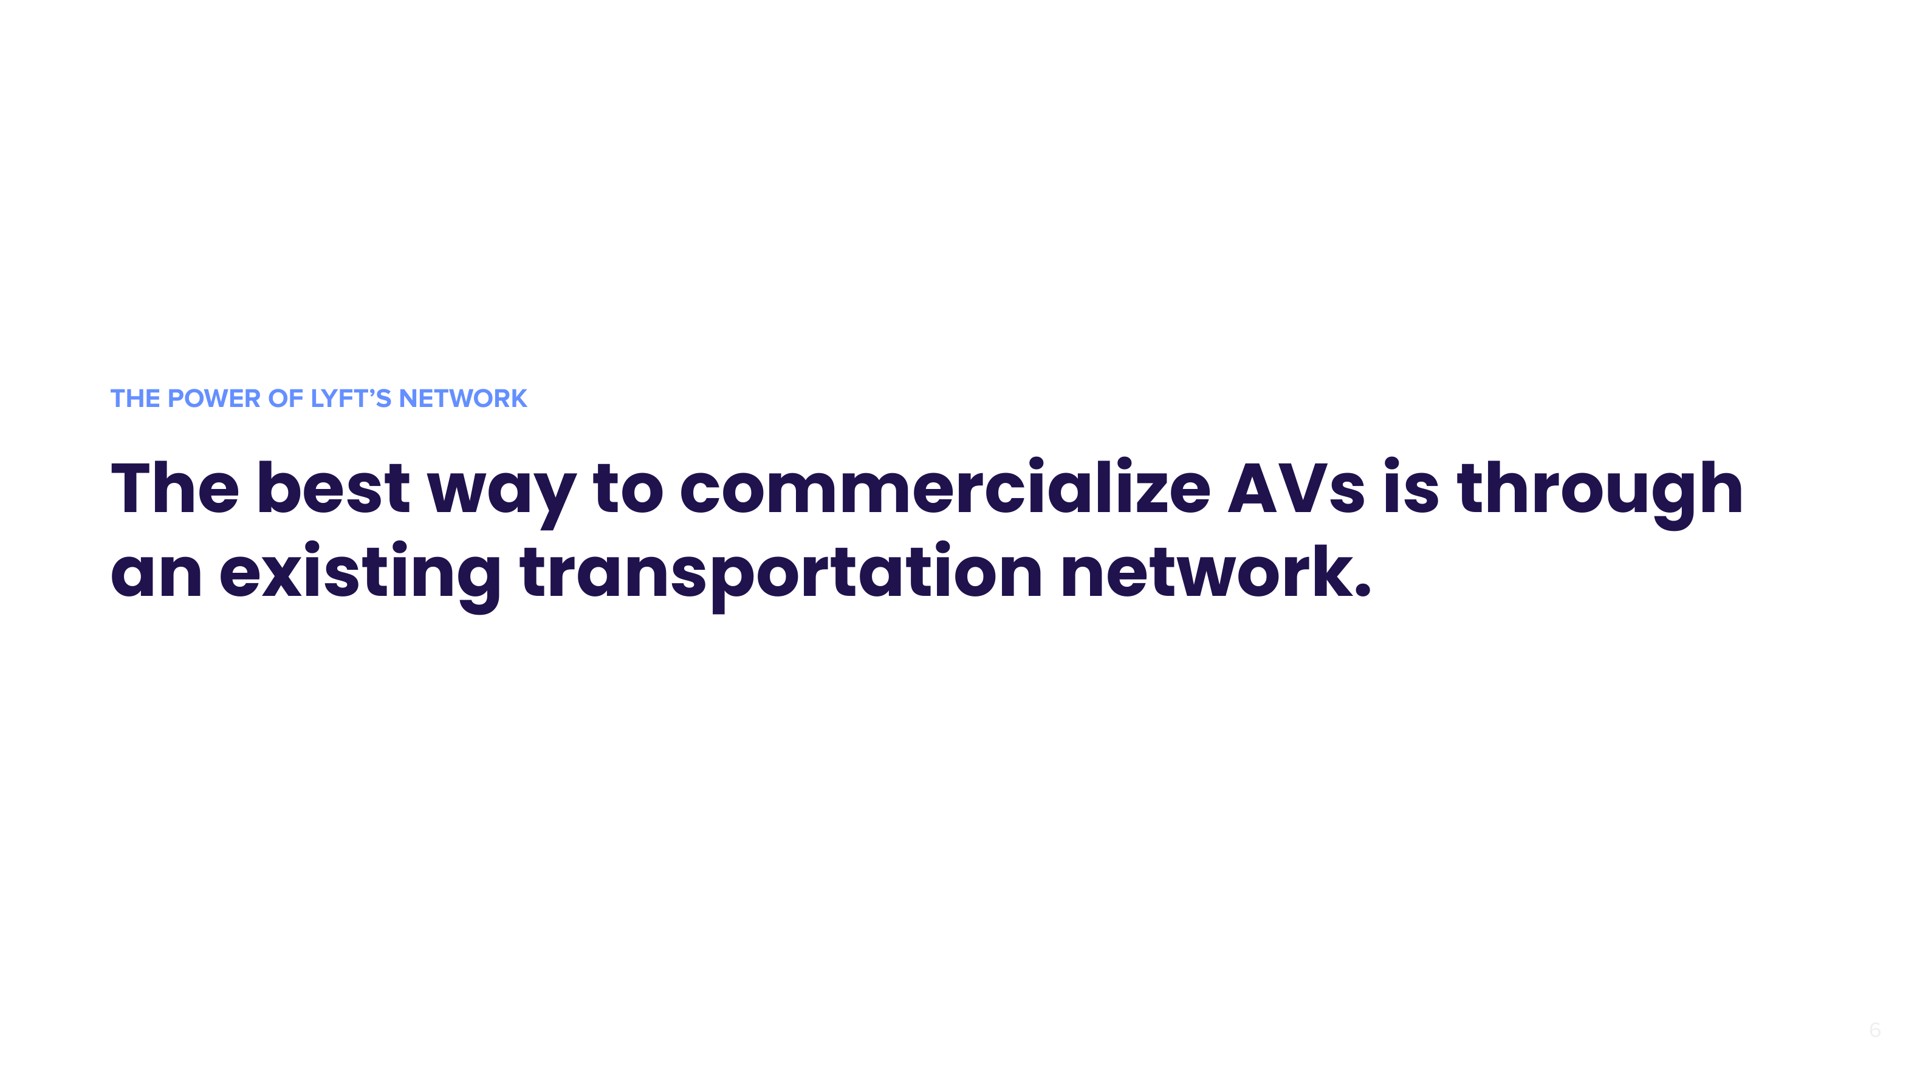 the best way to commercialize is through an existing transportation network | Lyft